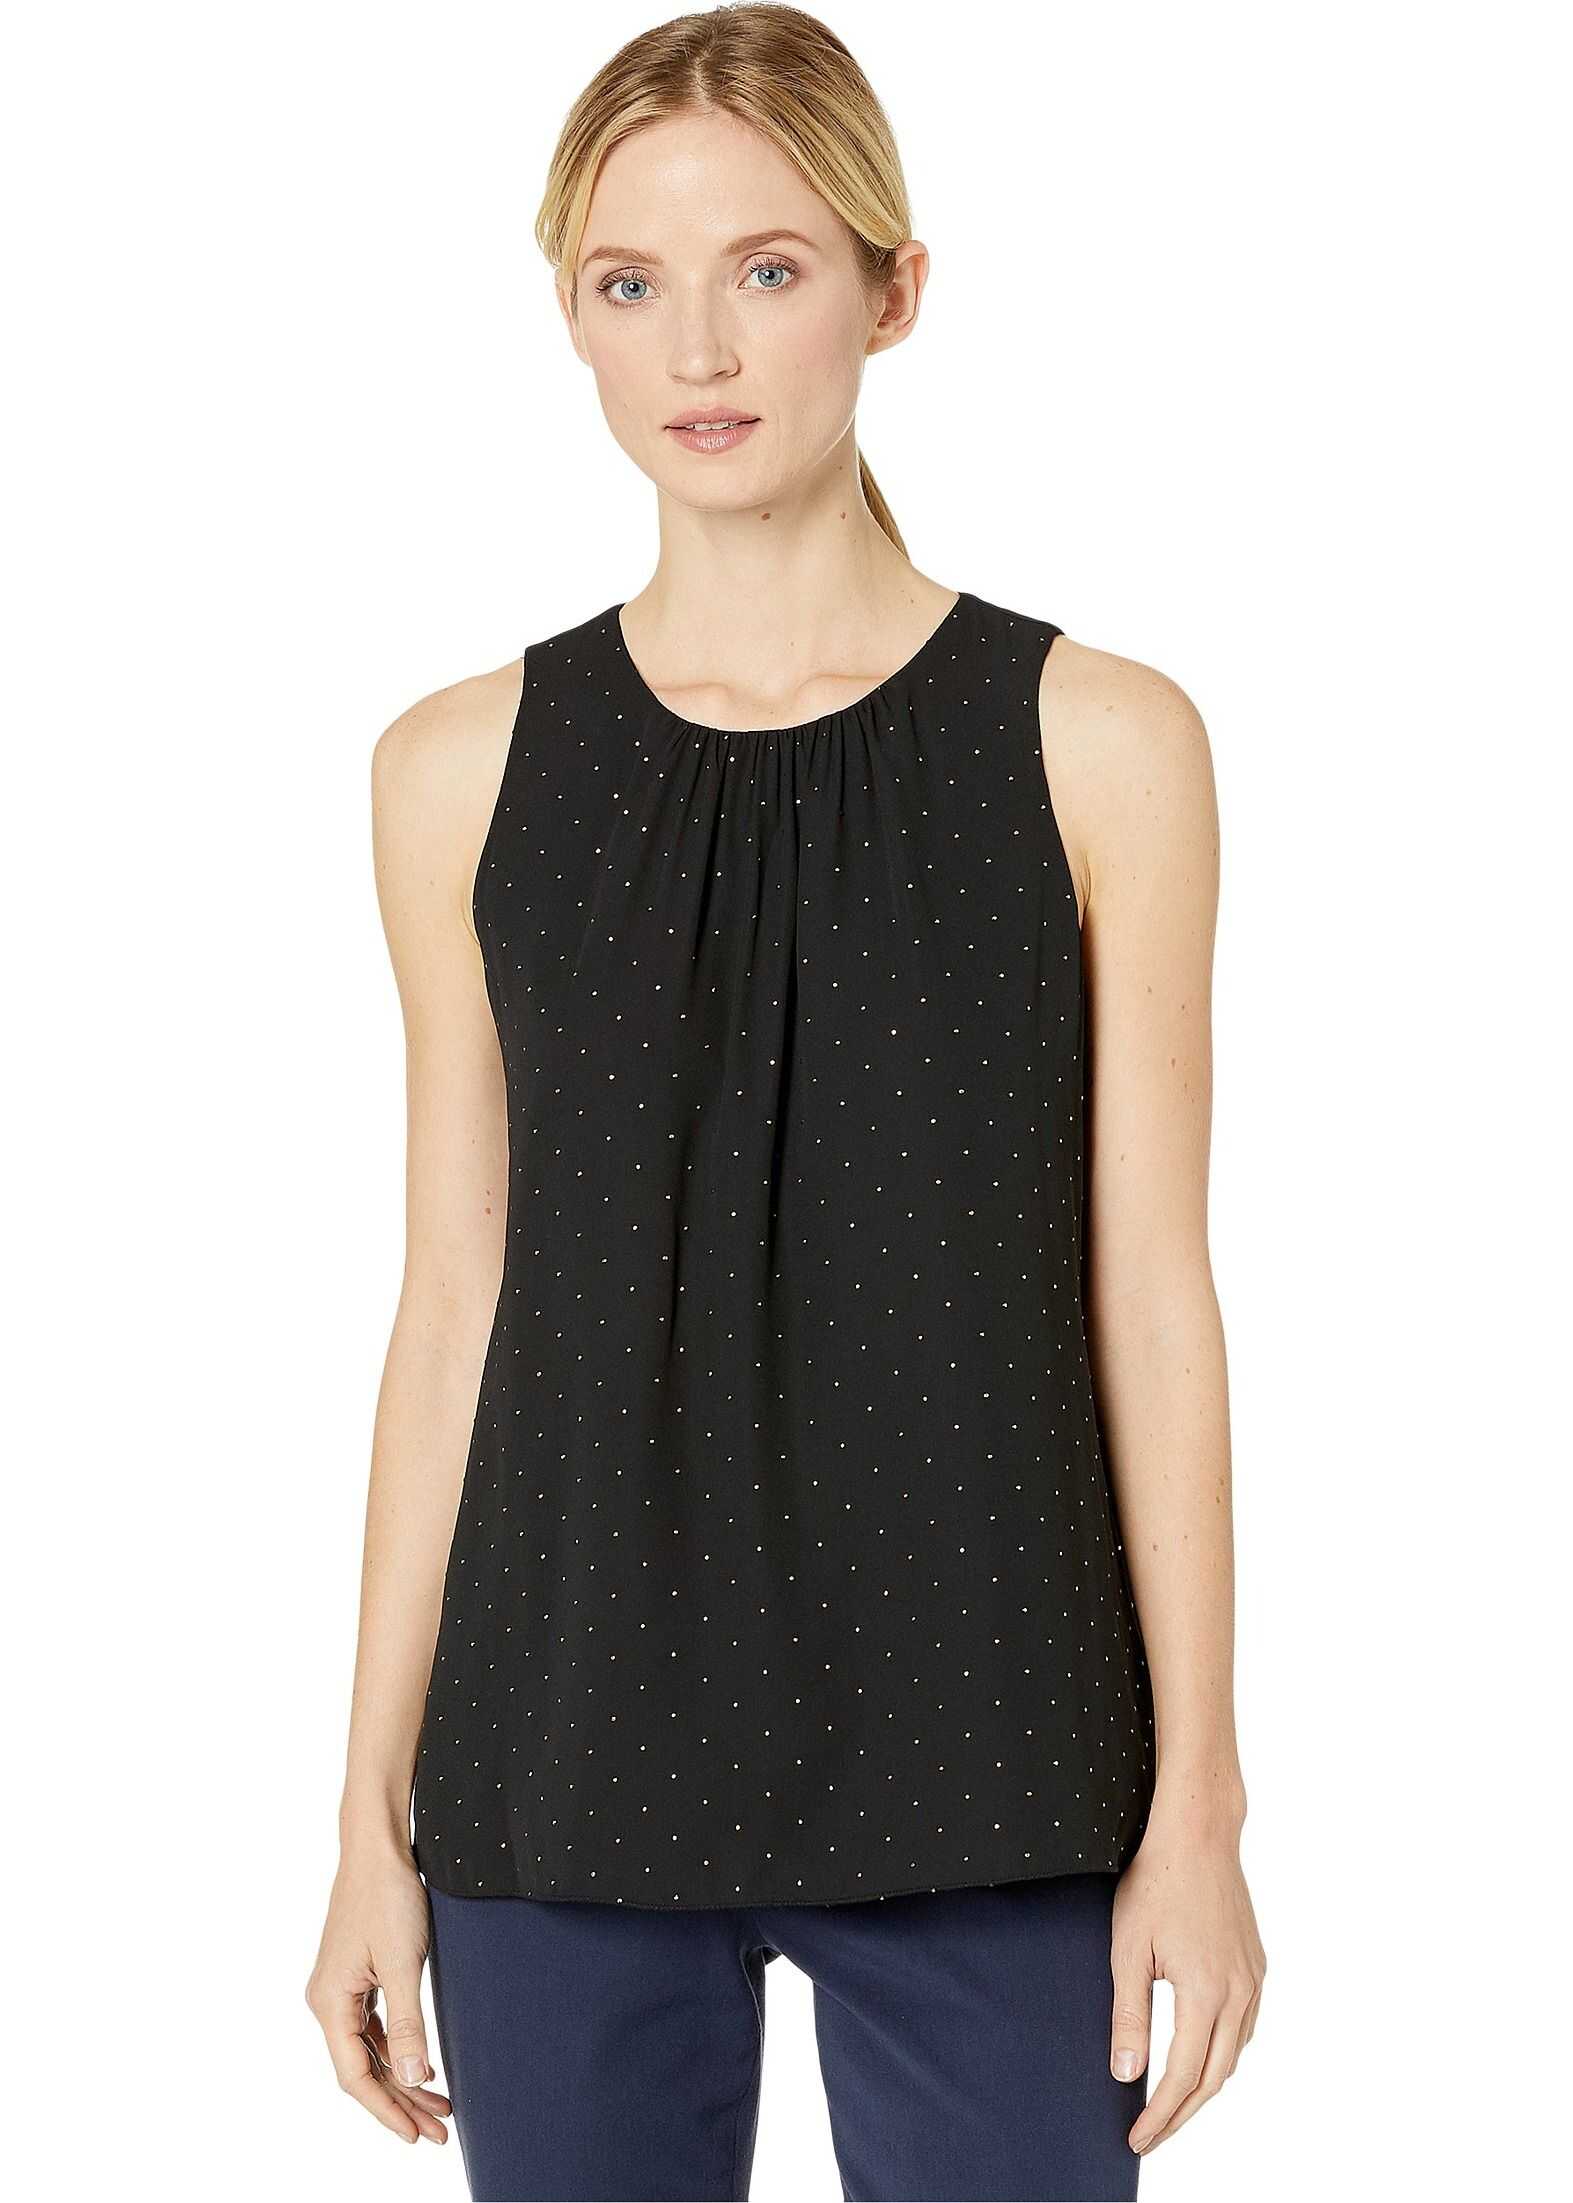 Calvin Klein Dotted Pleat Neck Woven Top Black/Gold